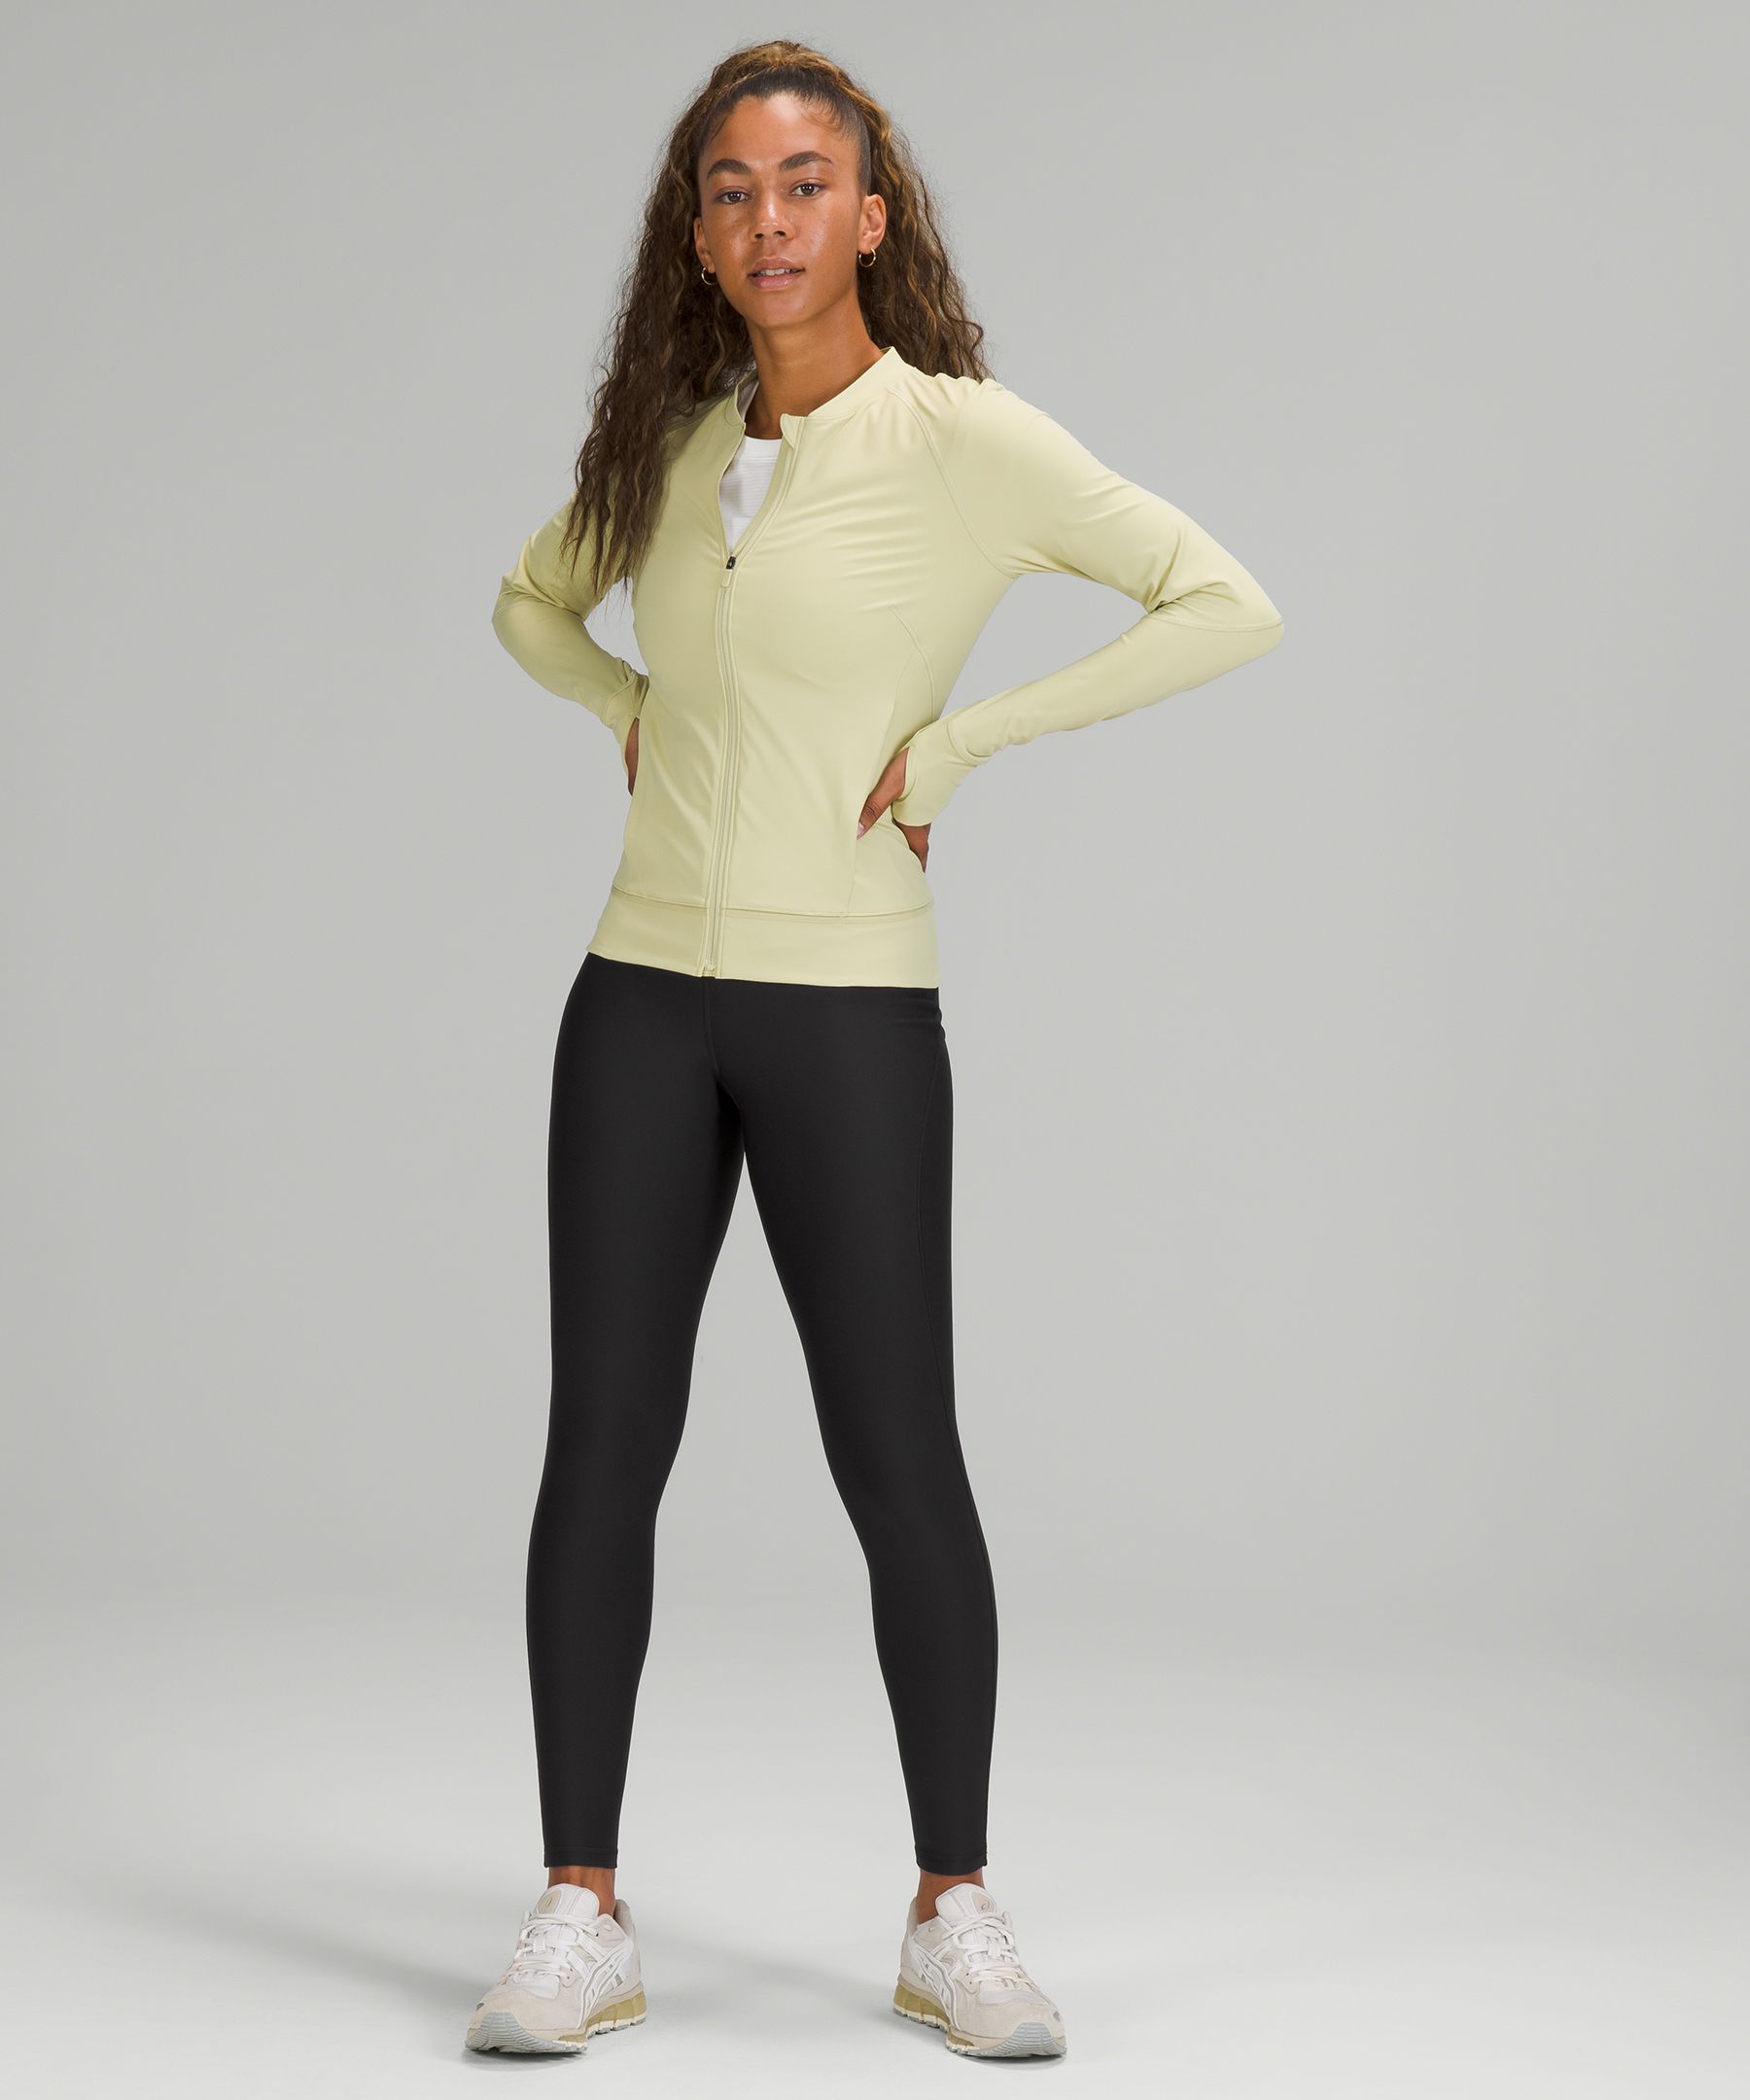 Lululemon athletica Base Pace High-Rise Tight 28